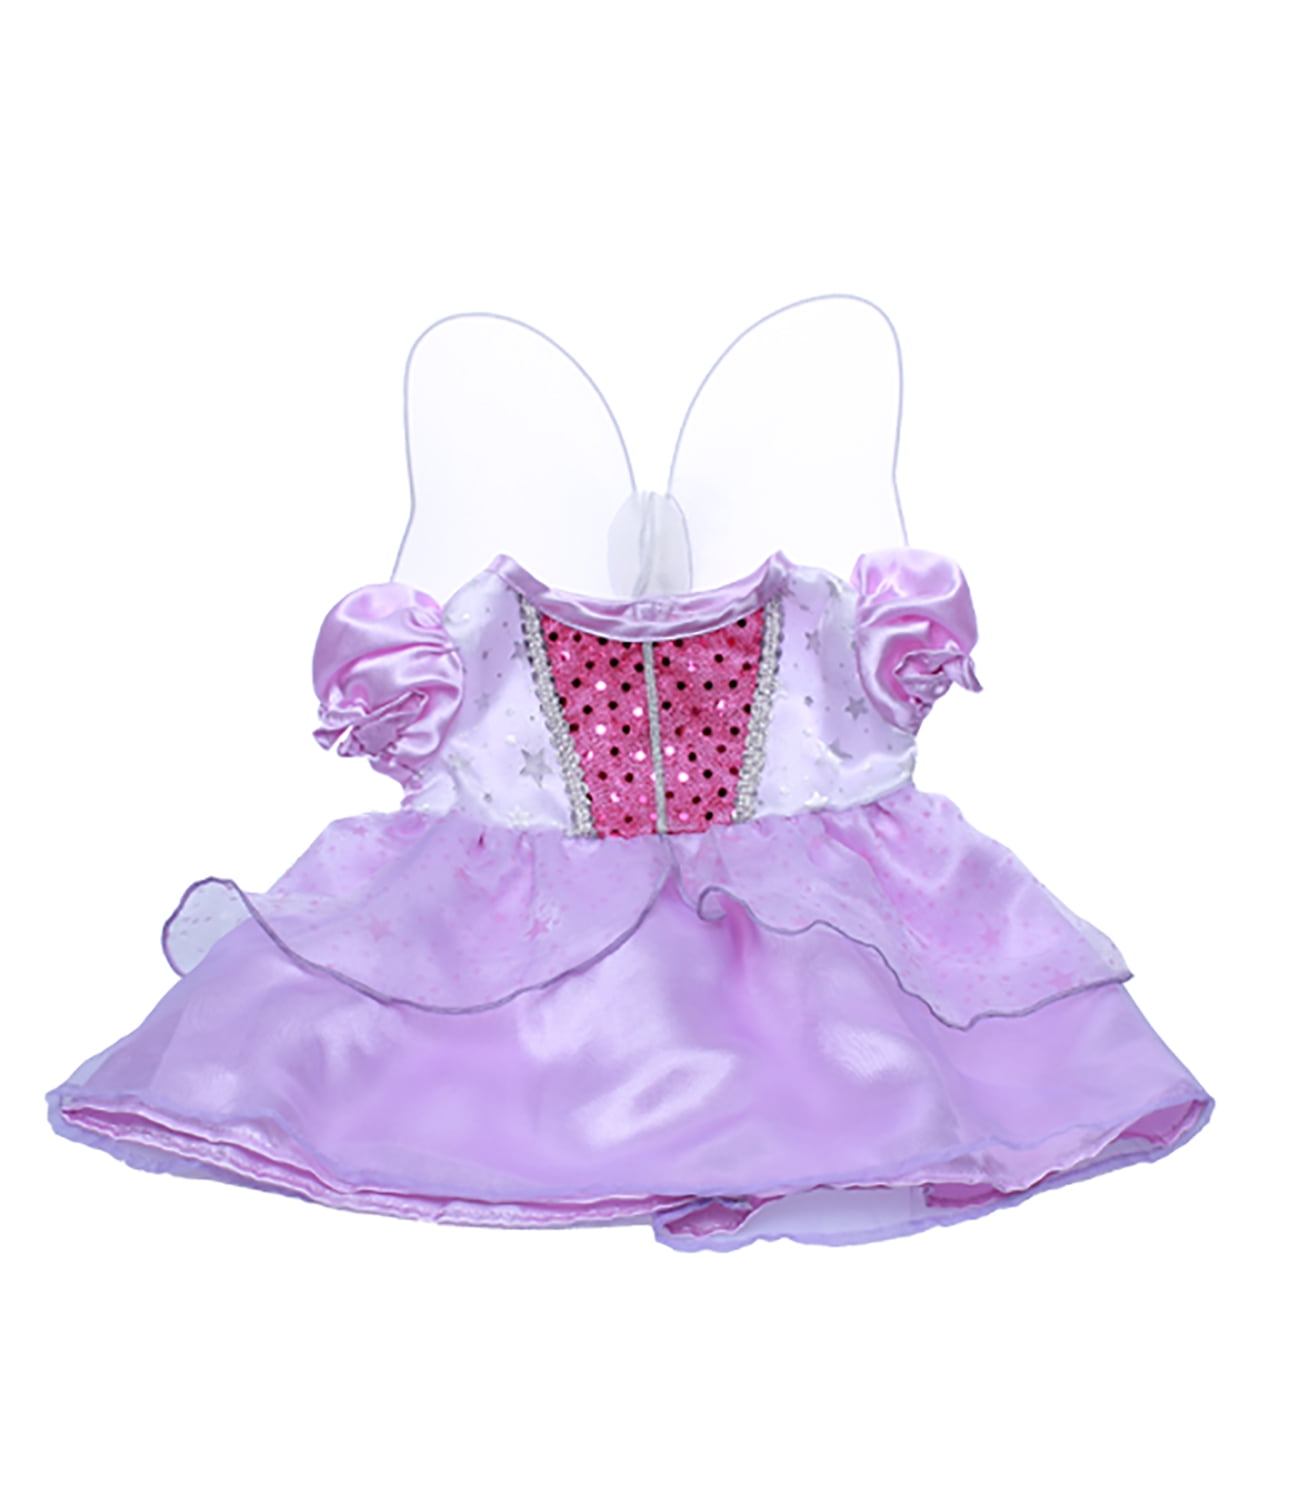 10" 20cm bears and animals Details about   Red Peppermint Princess Dress outfit to fit 8" 